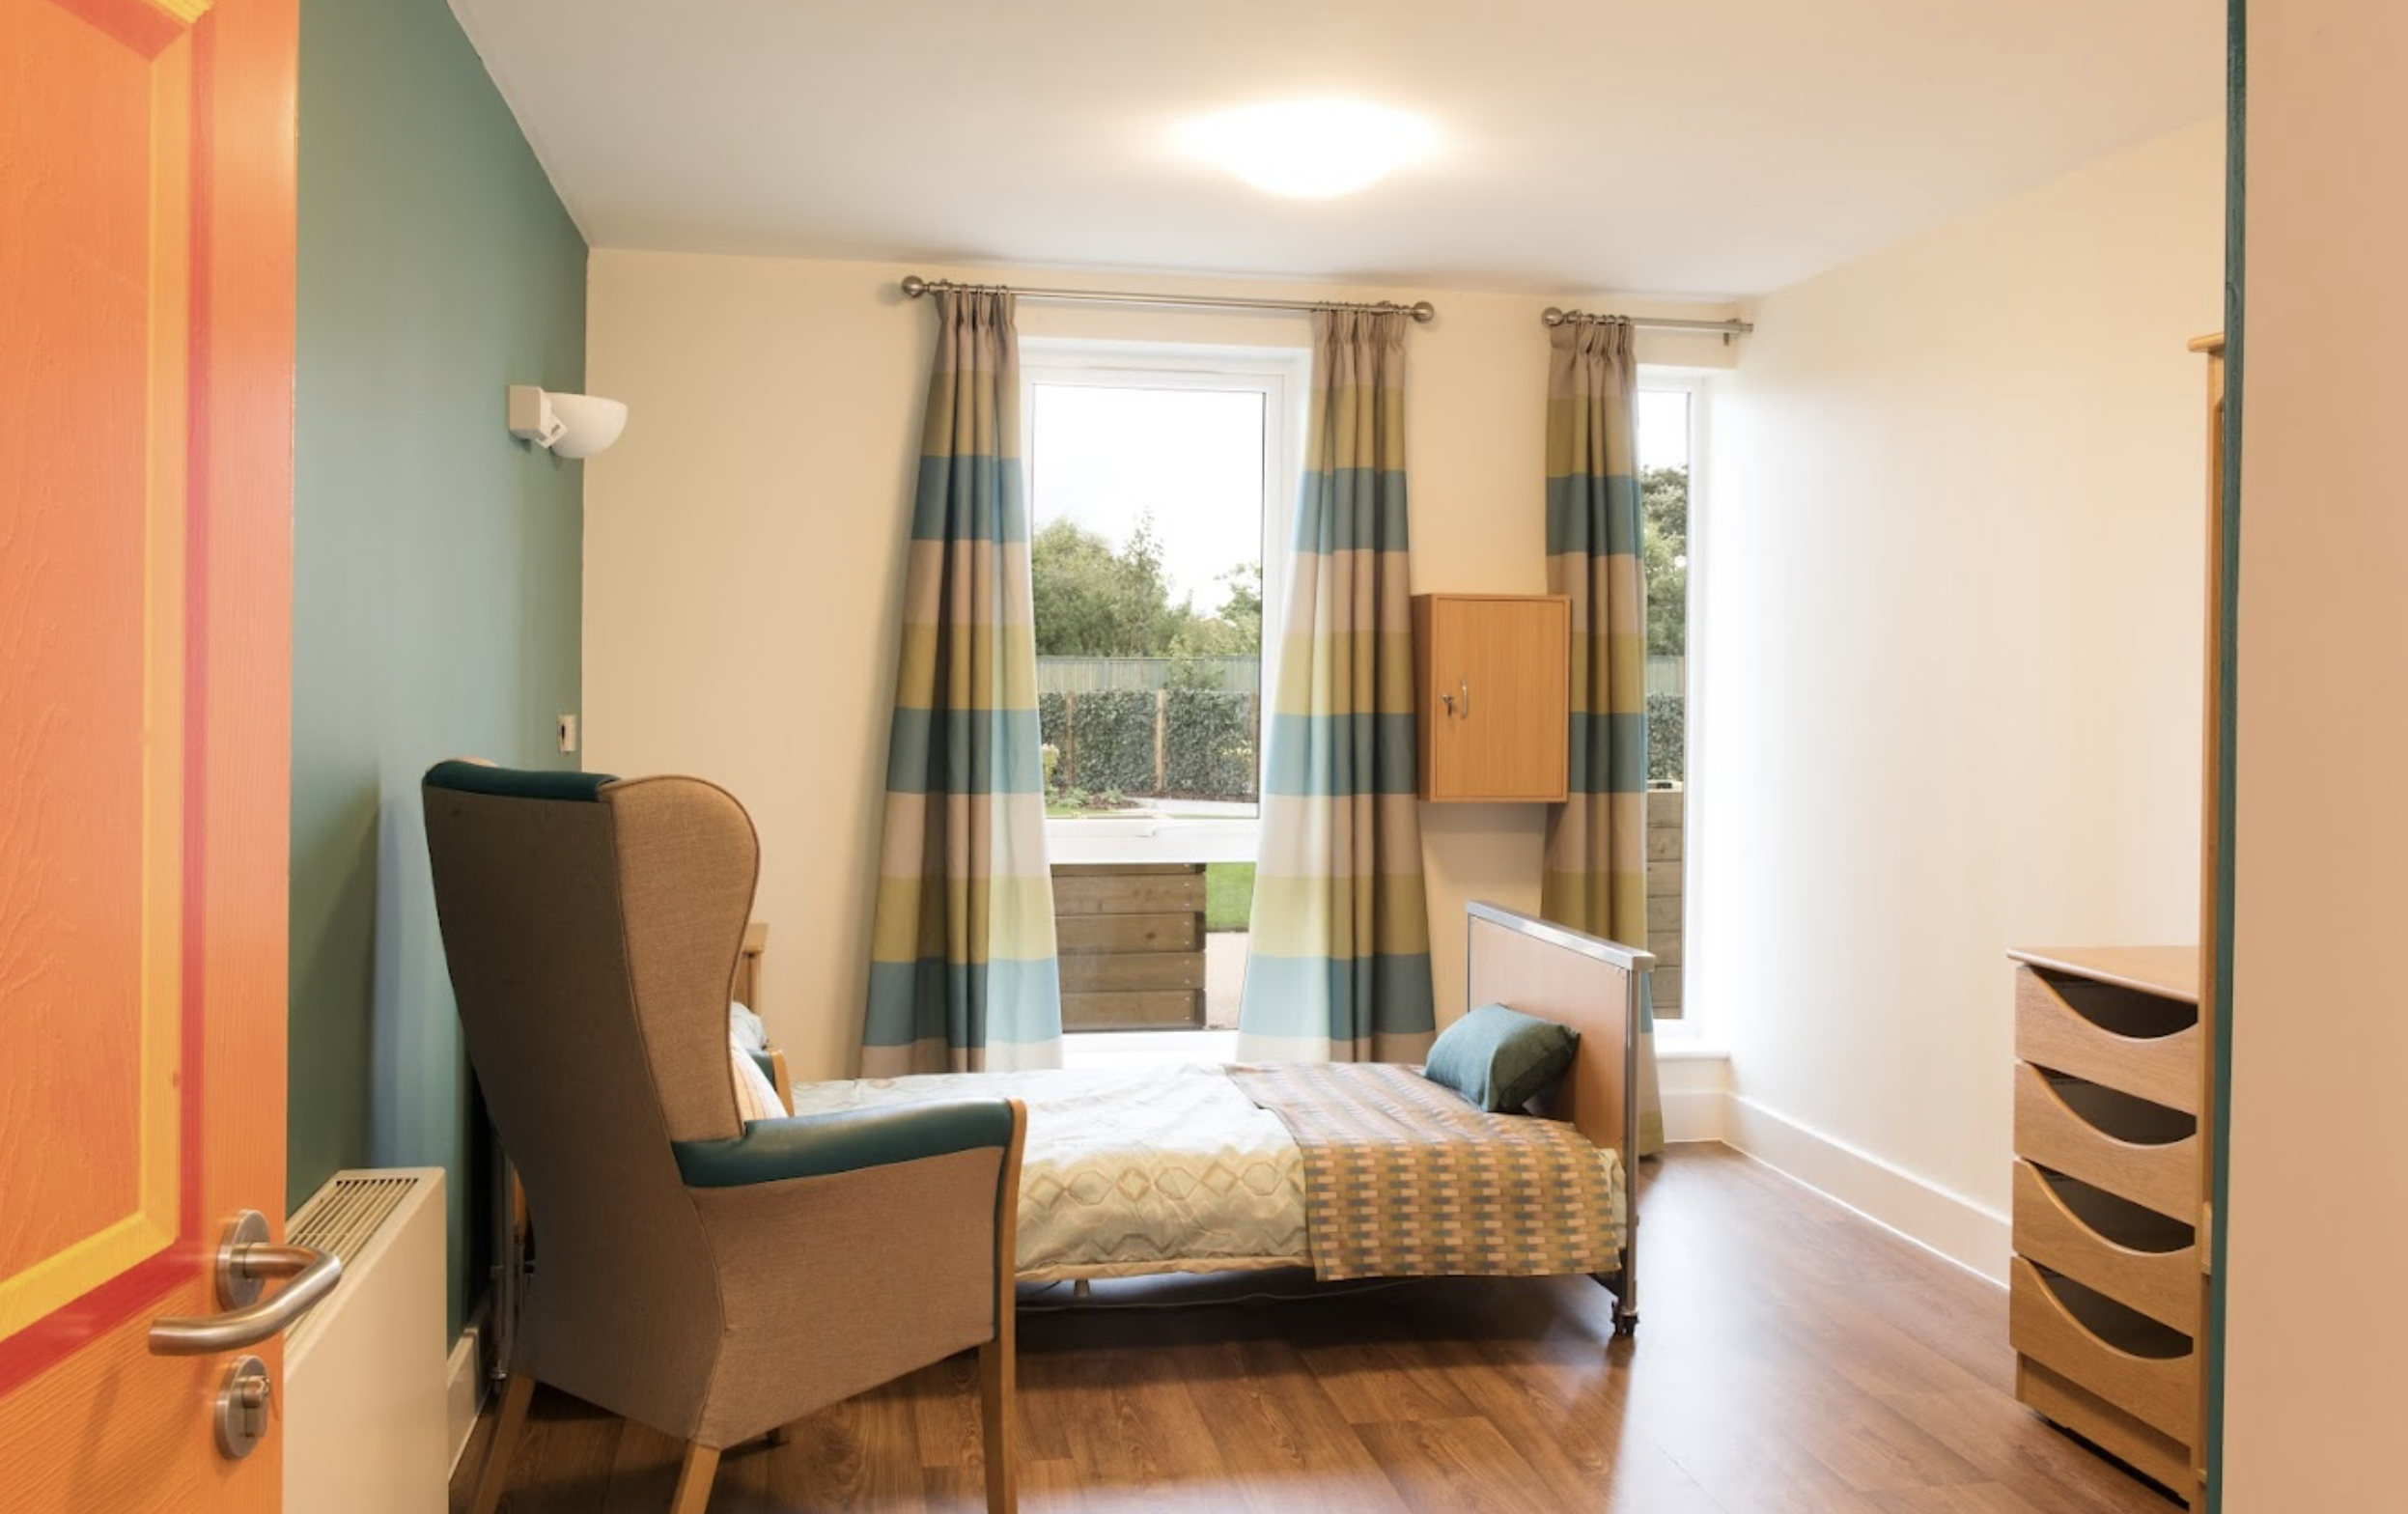 Bedroom of Ty Cariad care home in Cae Eithin, Abergele